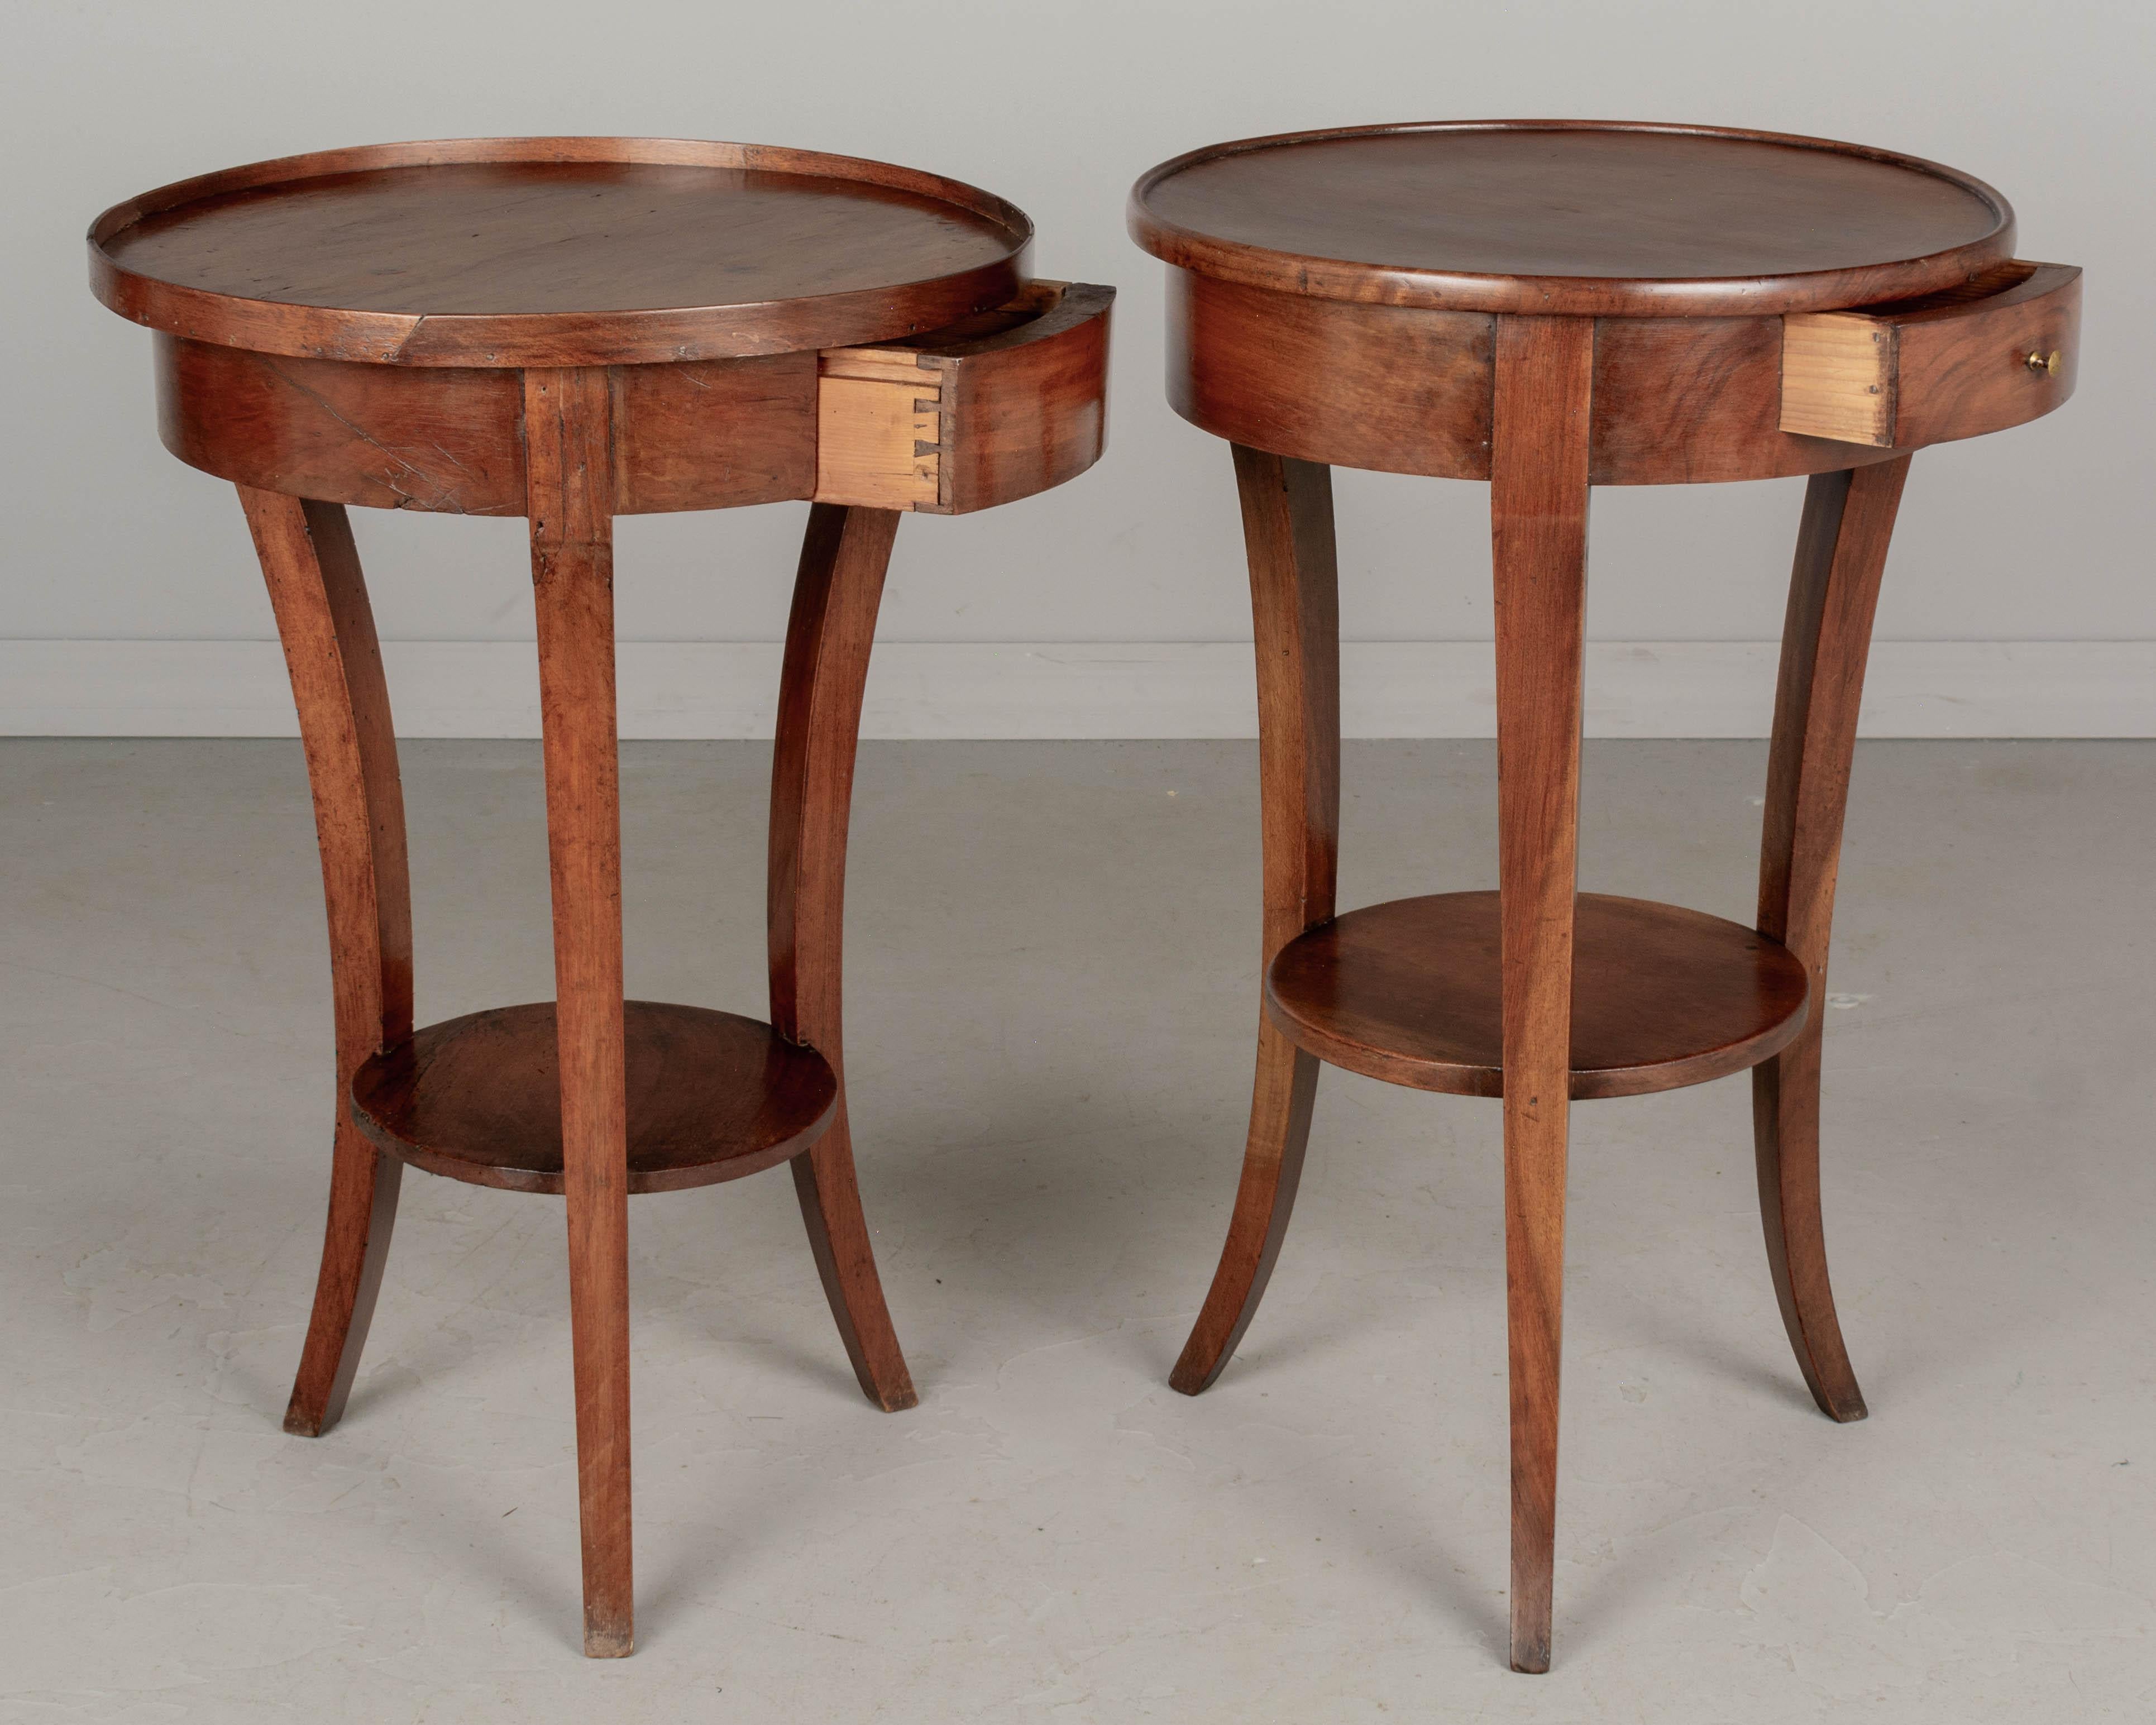 French Walnut Circular Side Tables, Set of 2 In Good Condition For Sale In Winter Park, FL